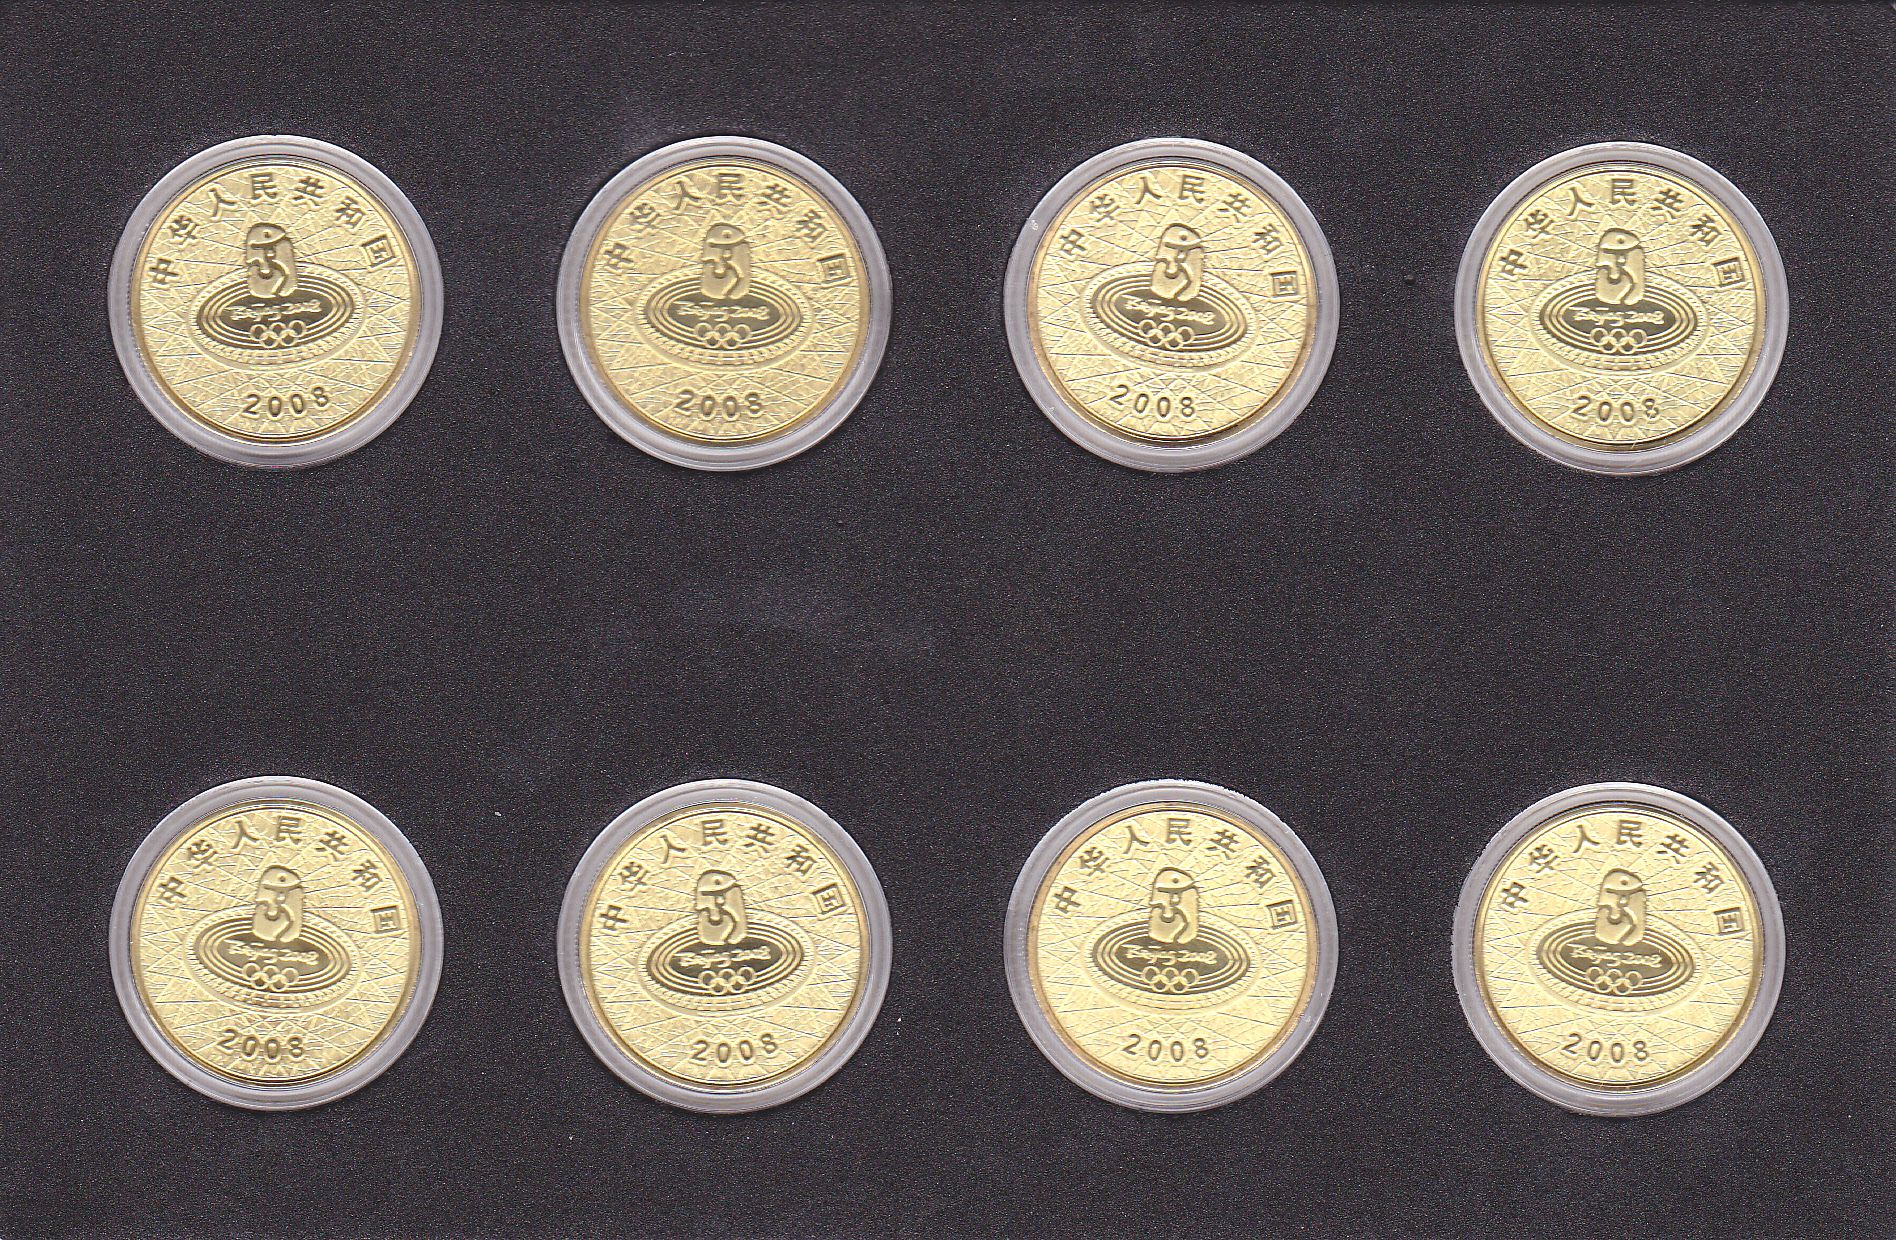 K7556, China Beijing 29th Olympic Games, 8 pcs Coins, 2008